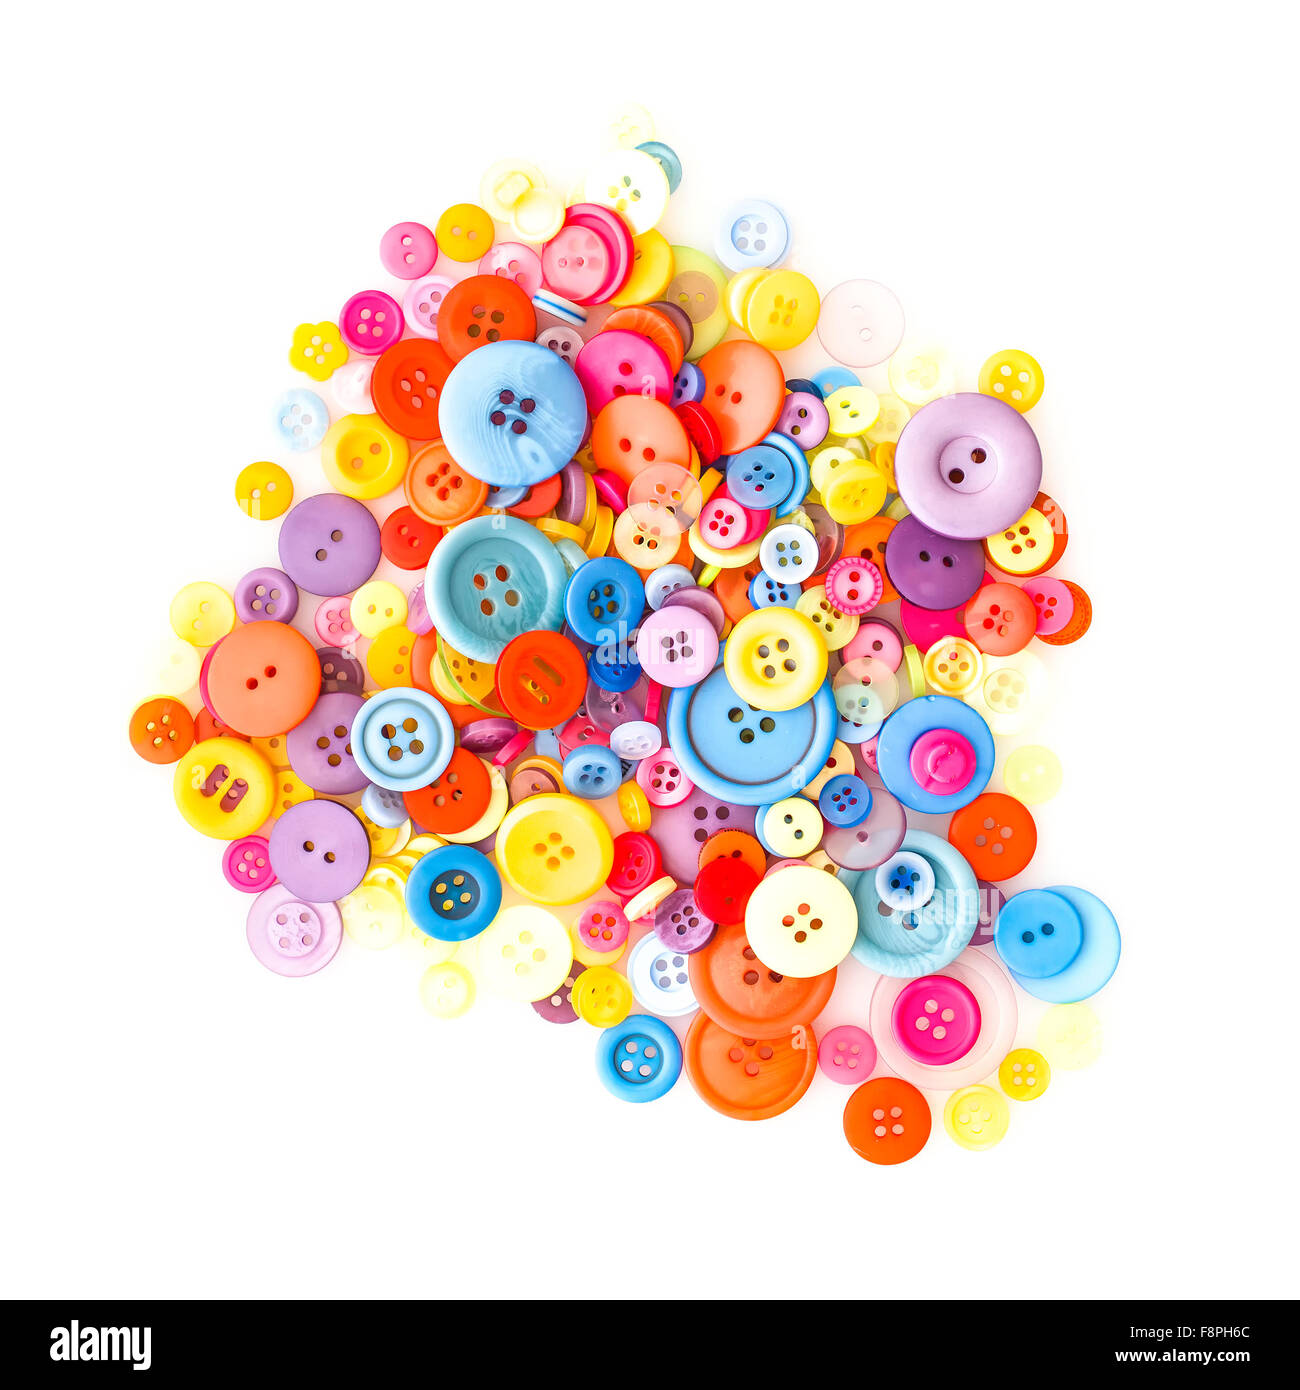 Colorful buttons isolated on a white background Stock Photo by innu_asha84